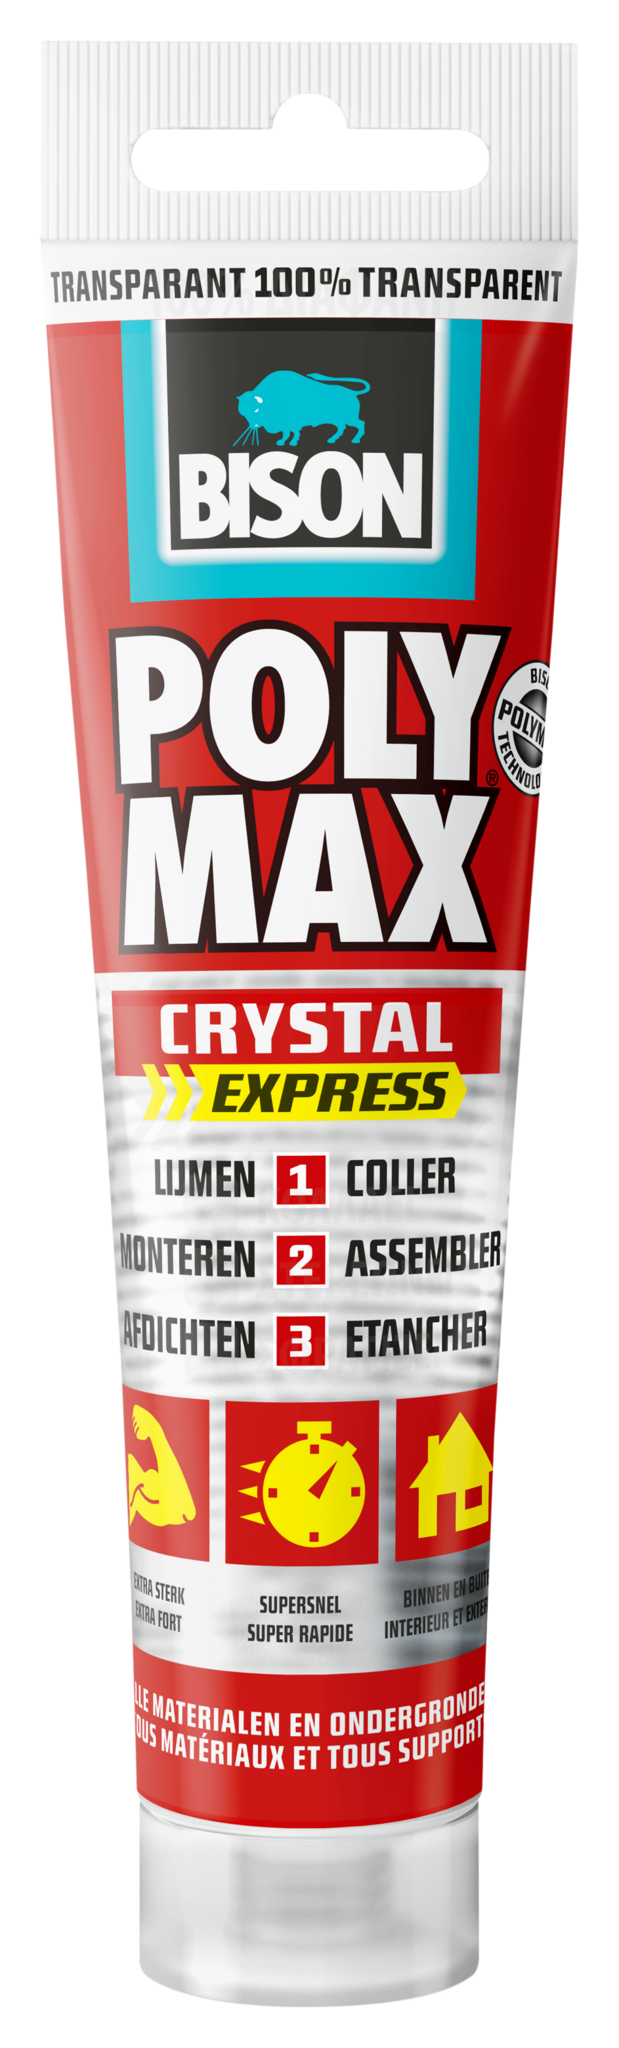 https://www.warentuin.nl/media/catalog/product/S/C/SCAN8710439199047_bison_poly_max_crystal_express_poly_max_crystal_express_hangt_0fb8.png